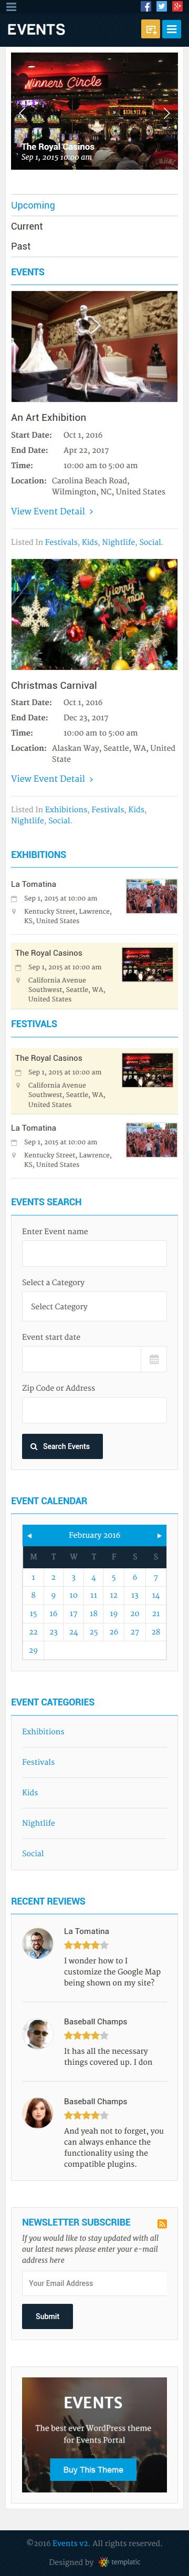 Mobile Friendly WP Events Theme